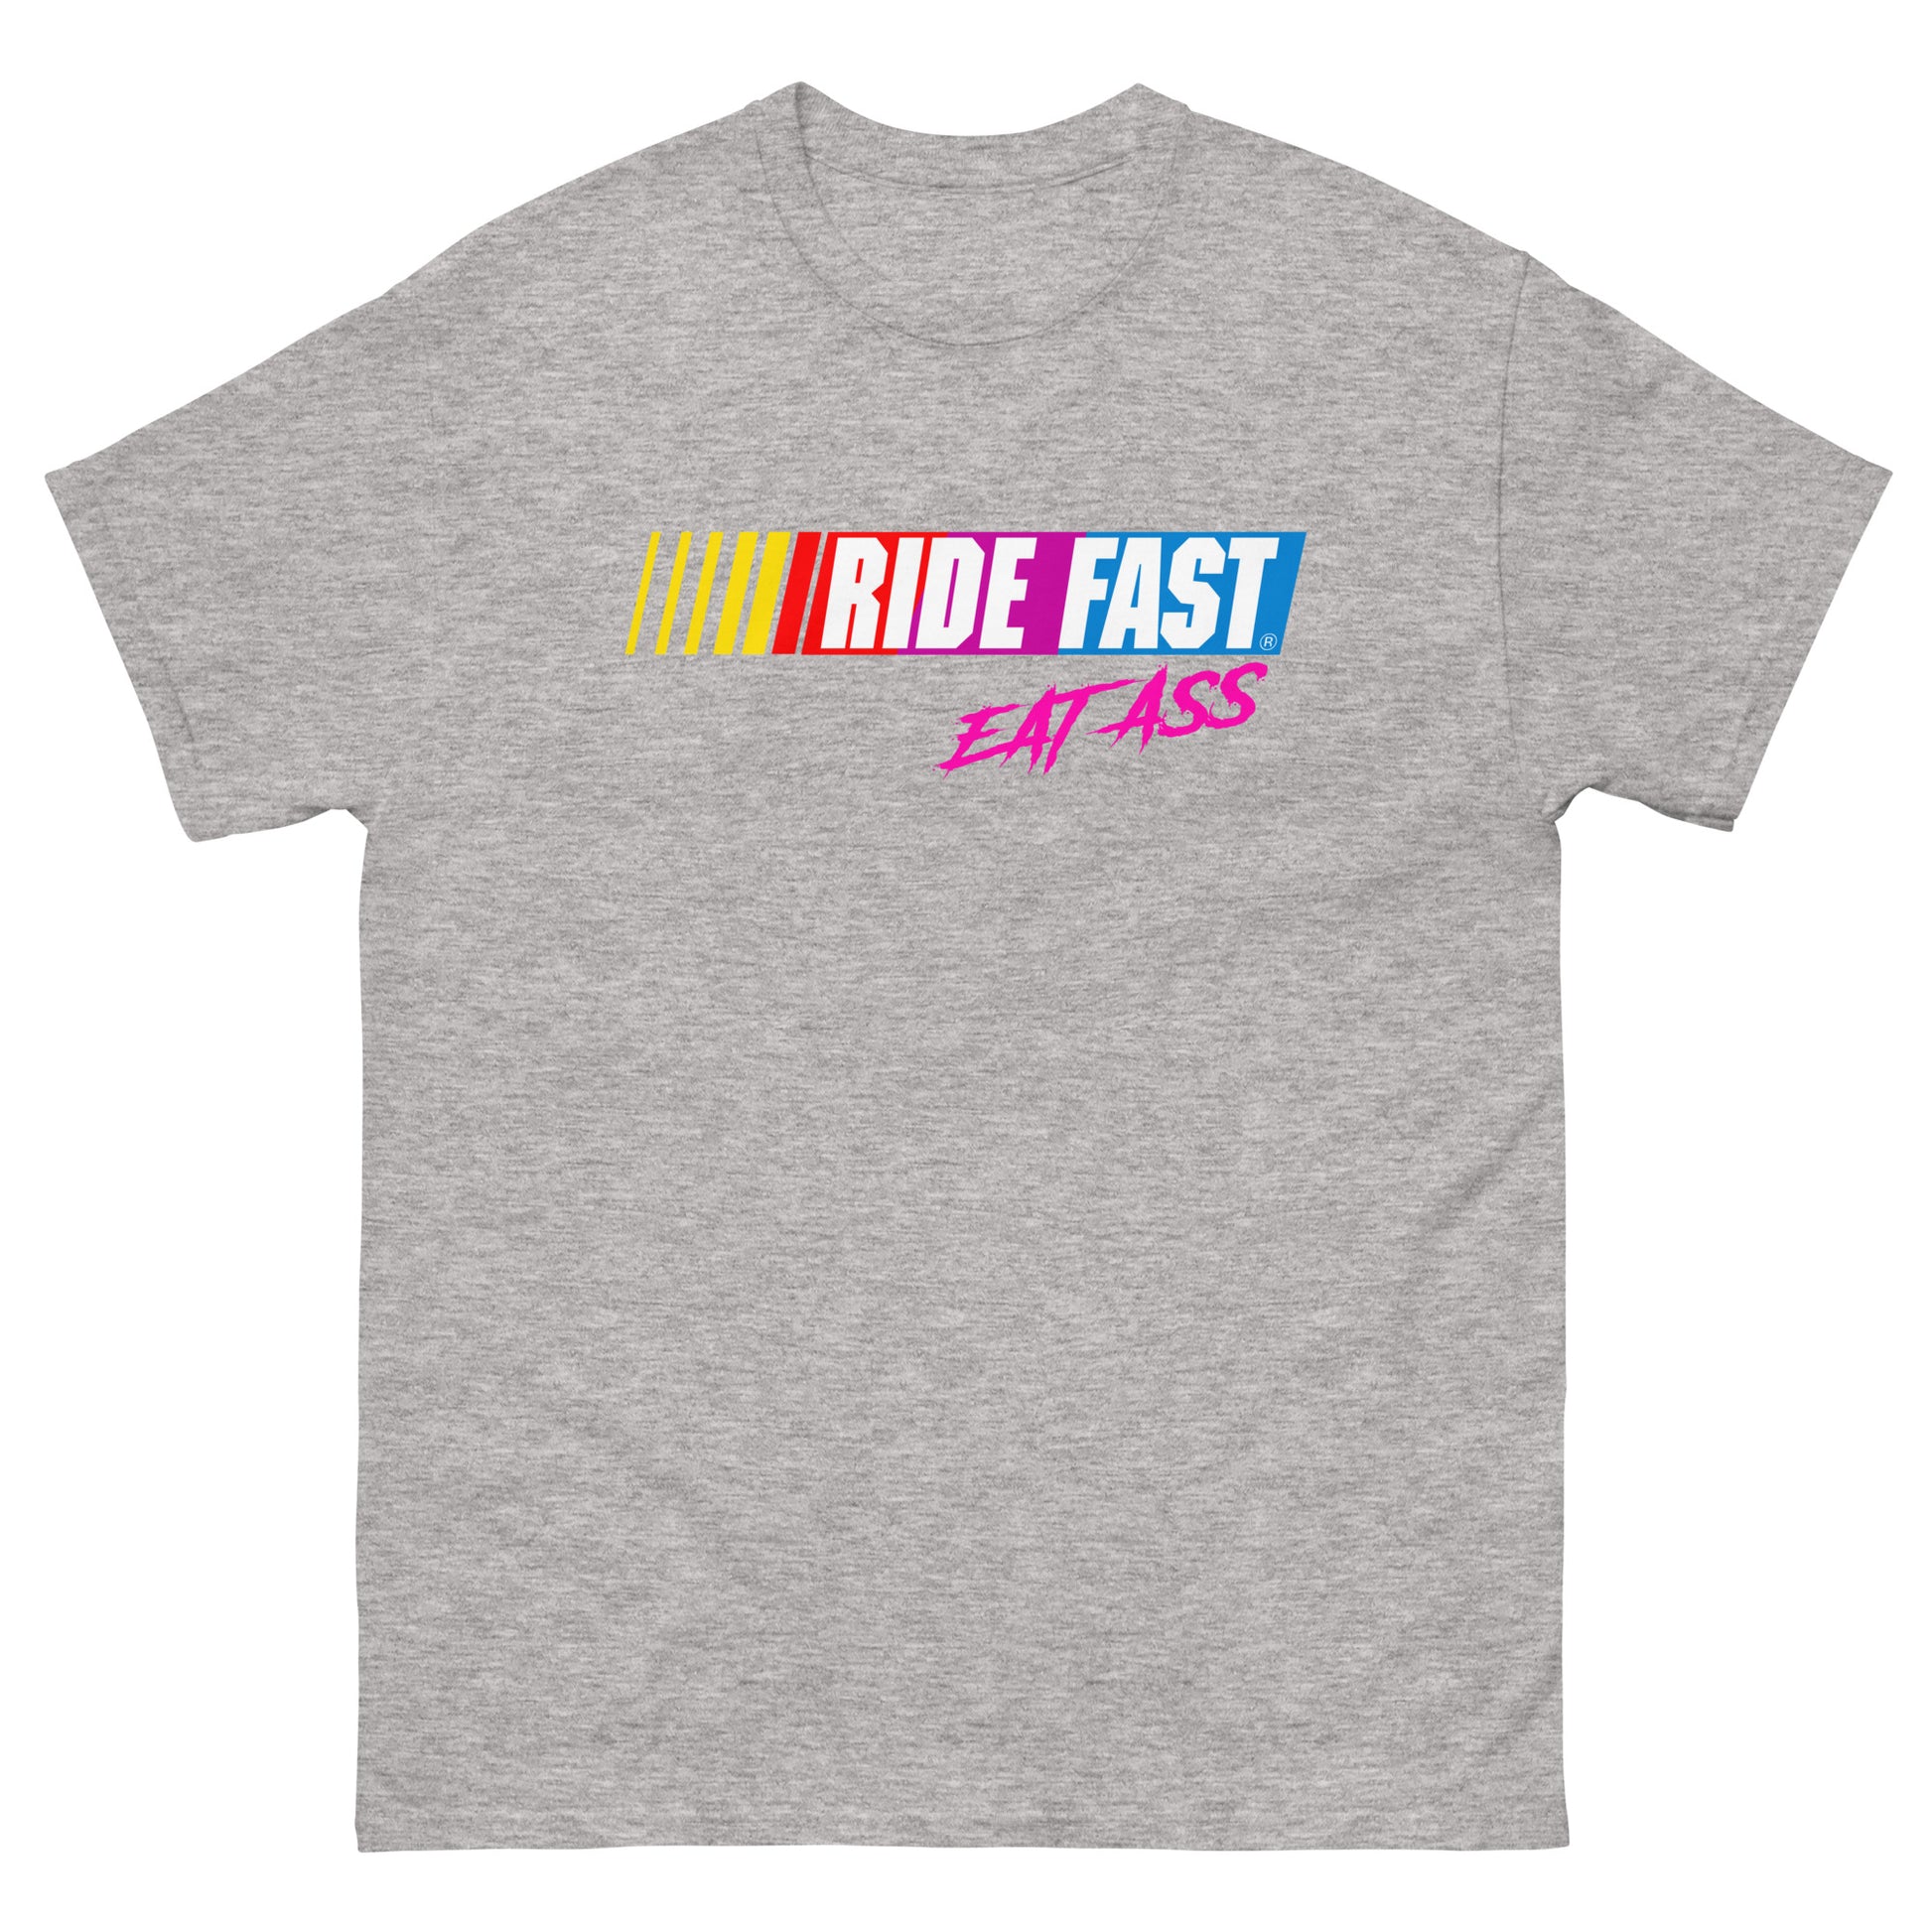 Ride fast eat ass design printed on t-shirt by Whistler Shirts